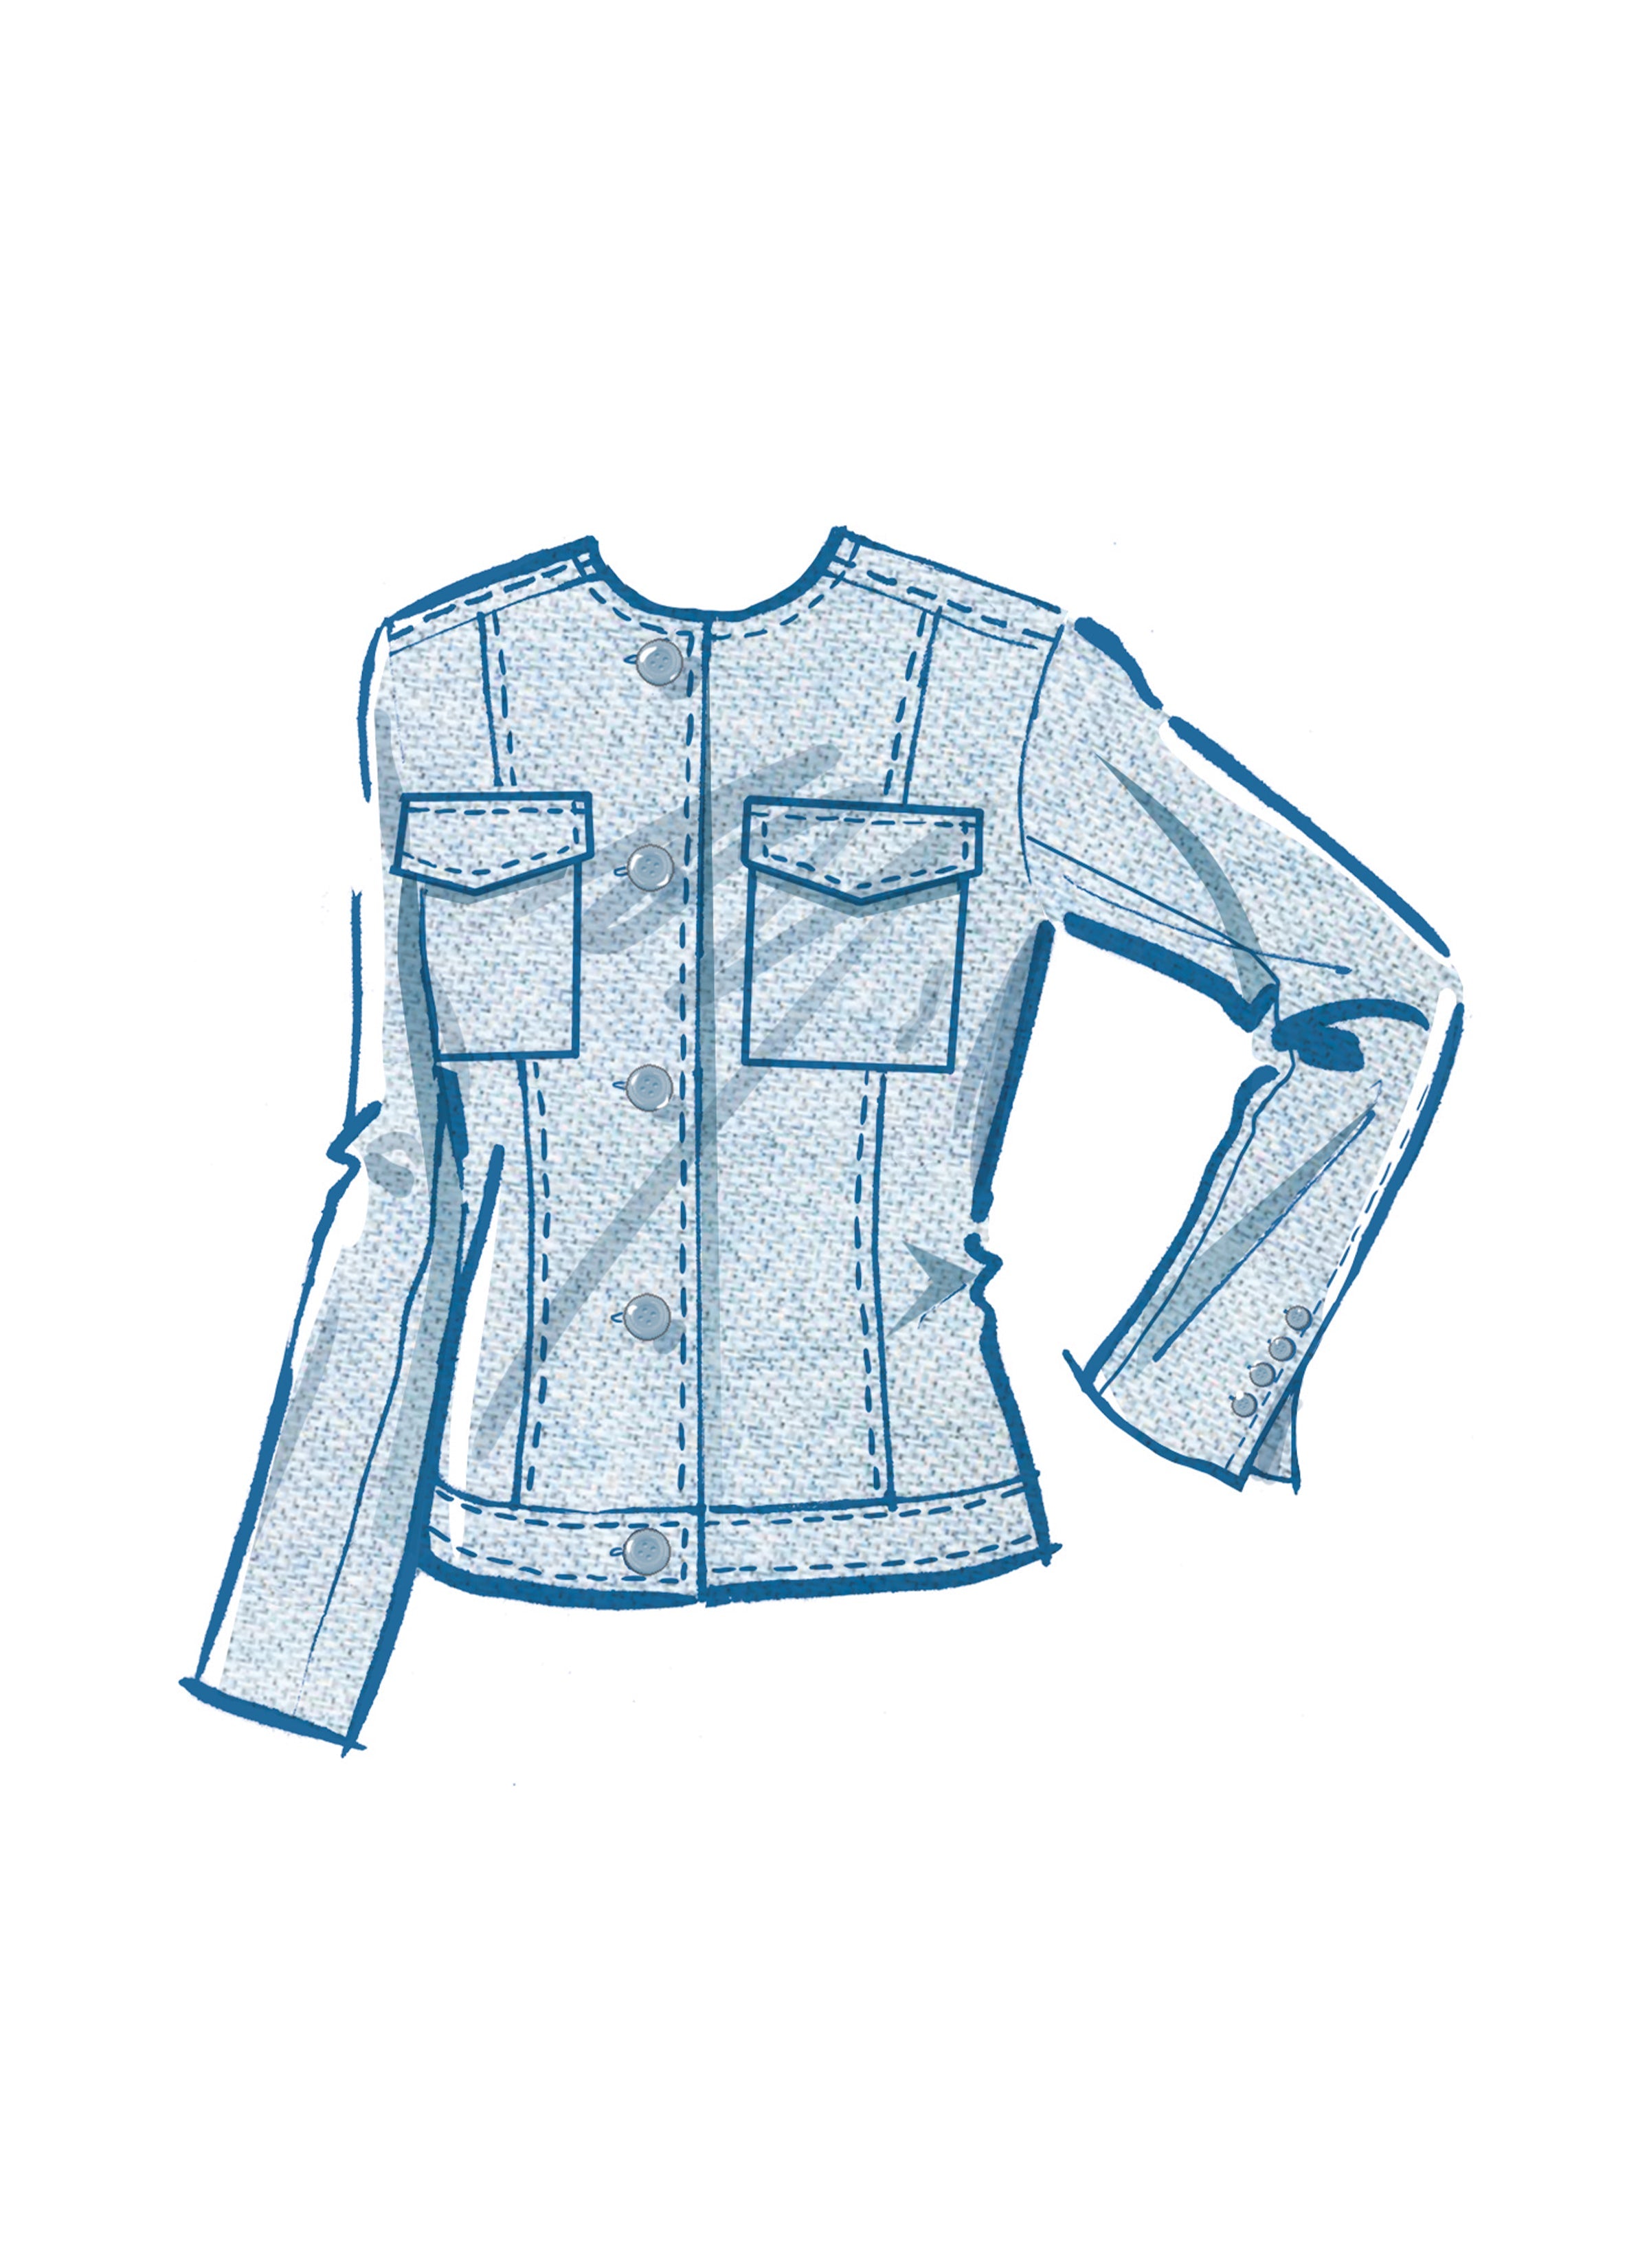 McCall's Sewing Pattern 8474 Misses' Jacket by Melissa Watson from Jaycotts Sewing Supplies